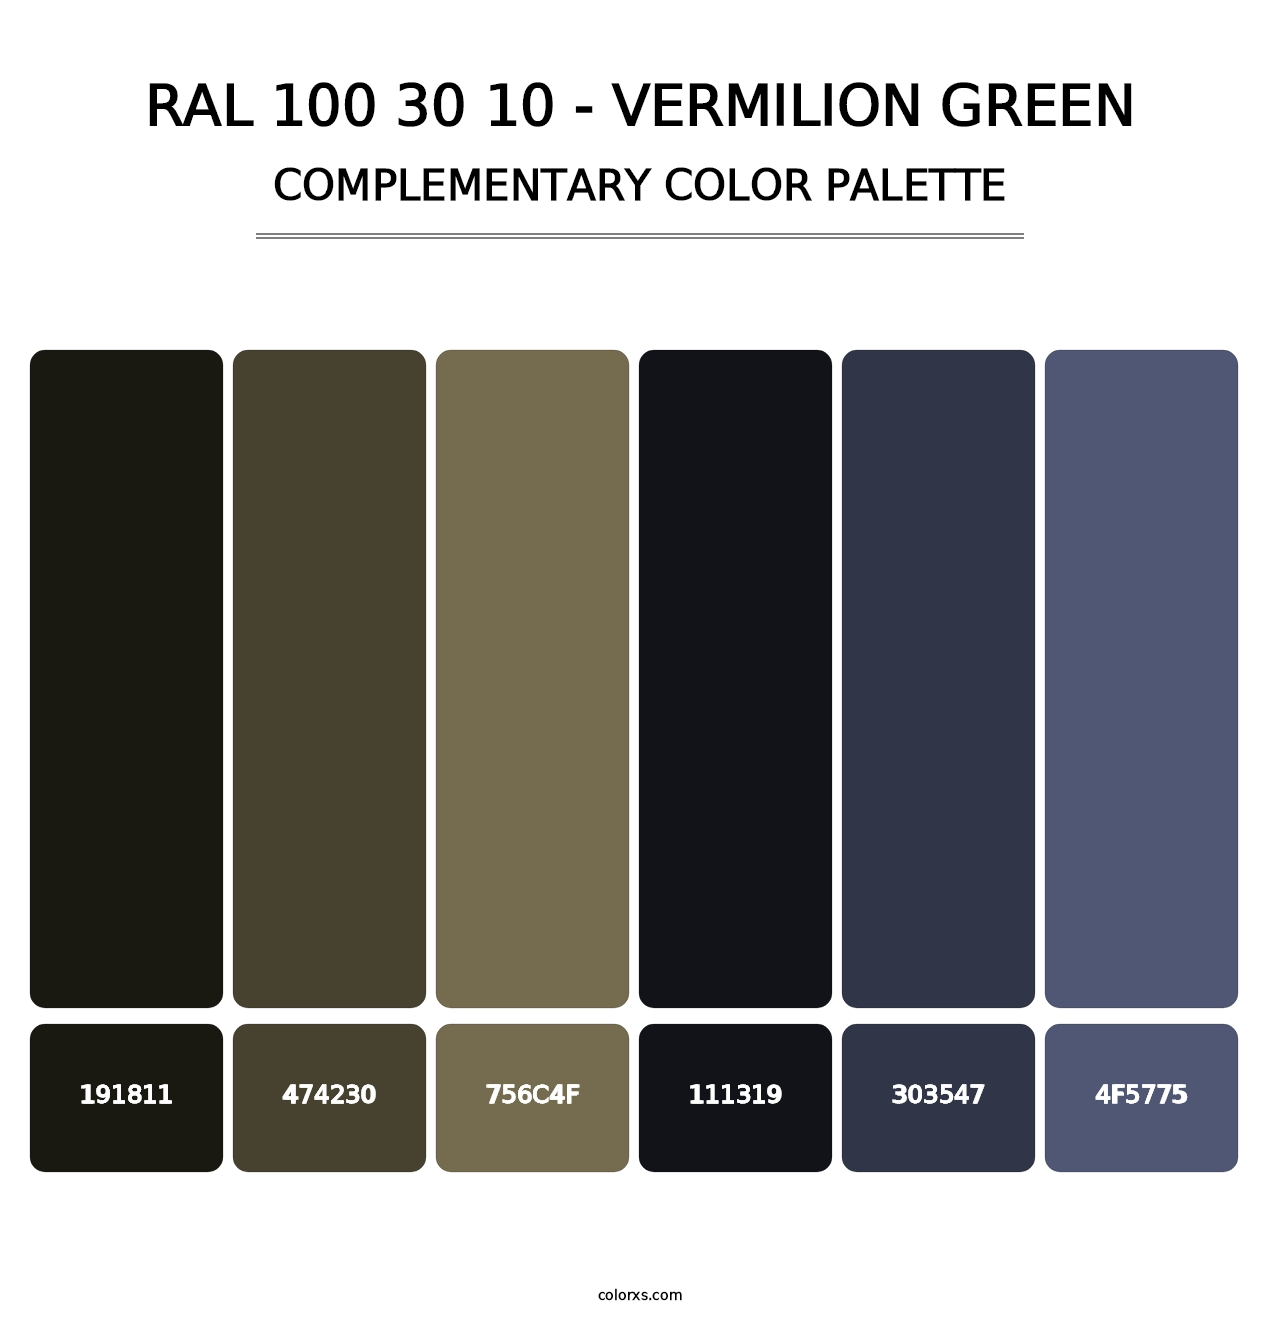 RAL 100 30 10 - Vermilion Green - Complementary Color Palette